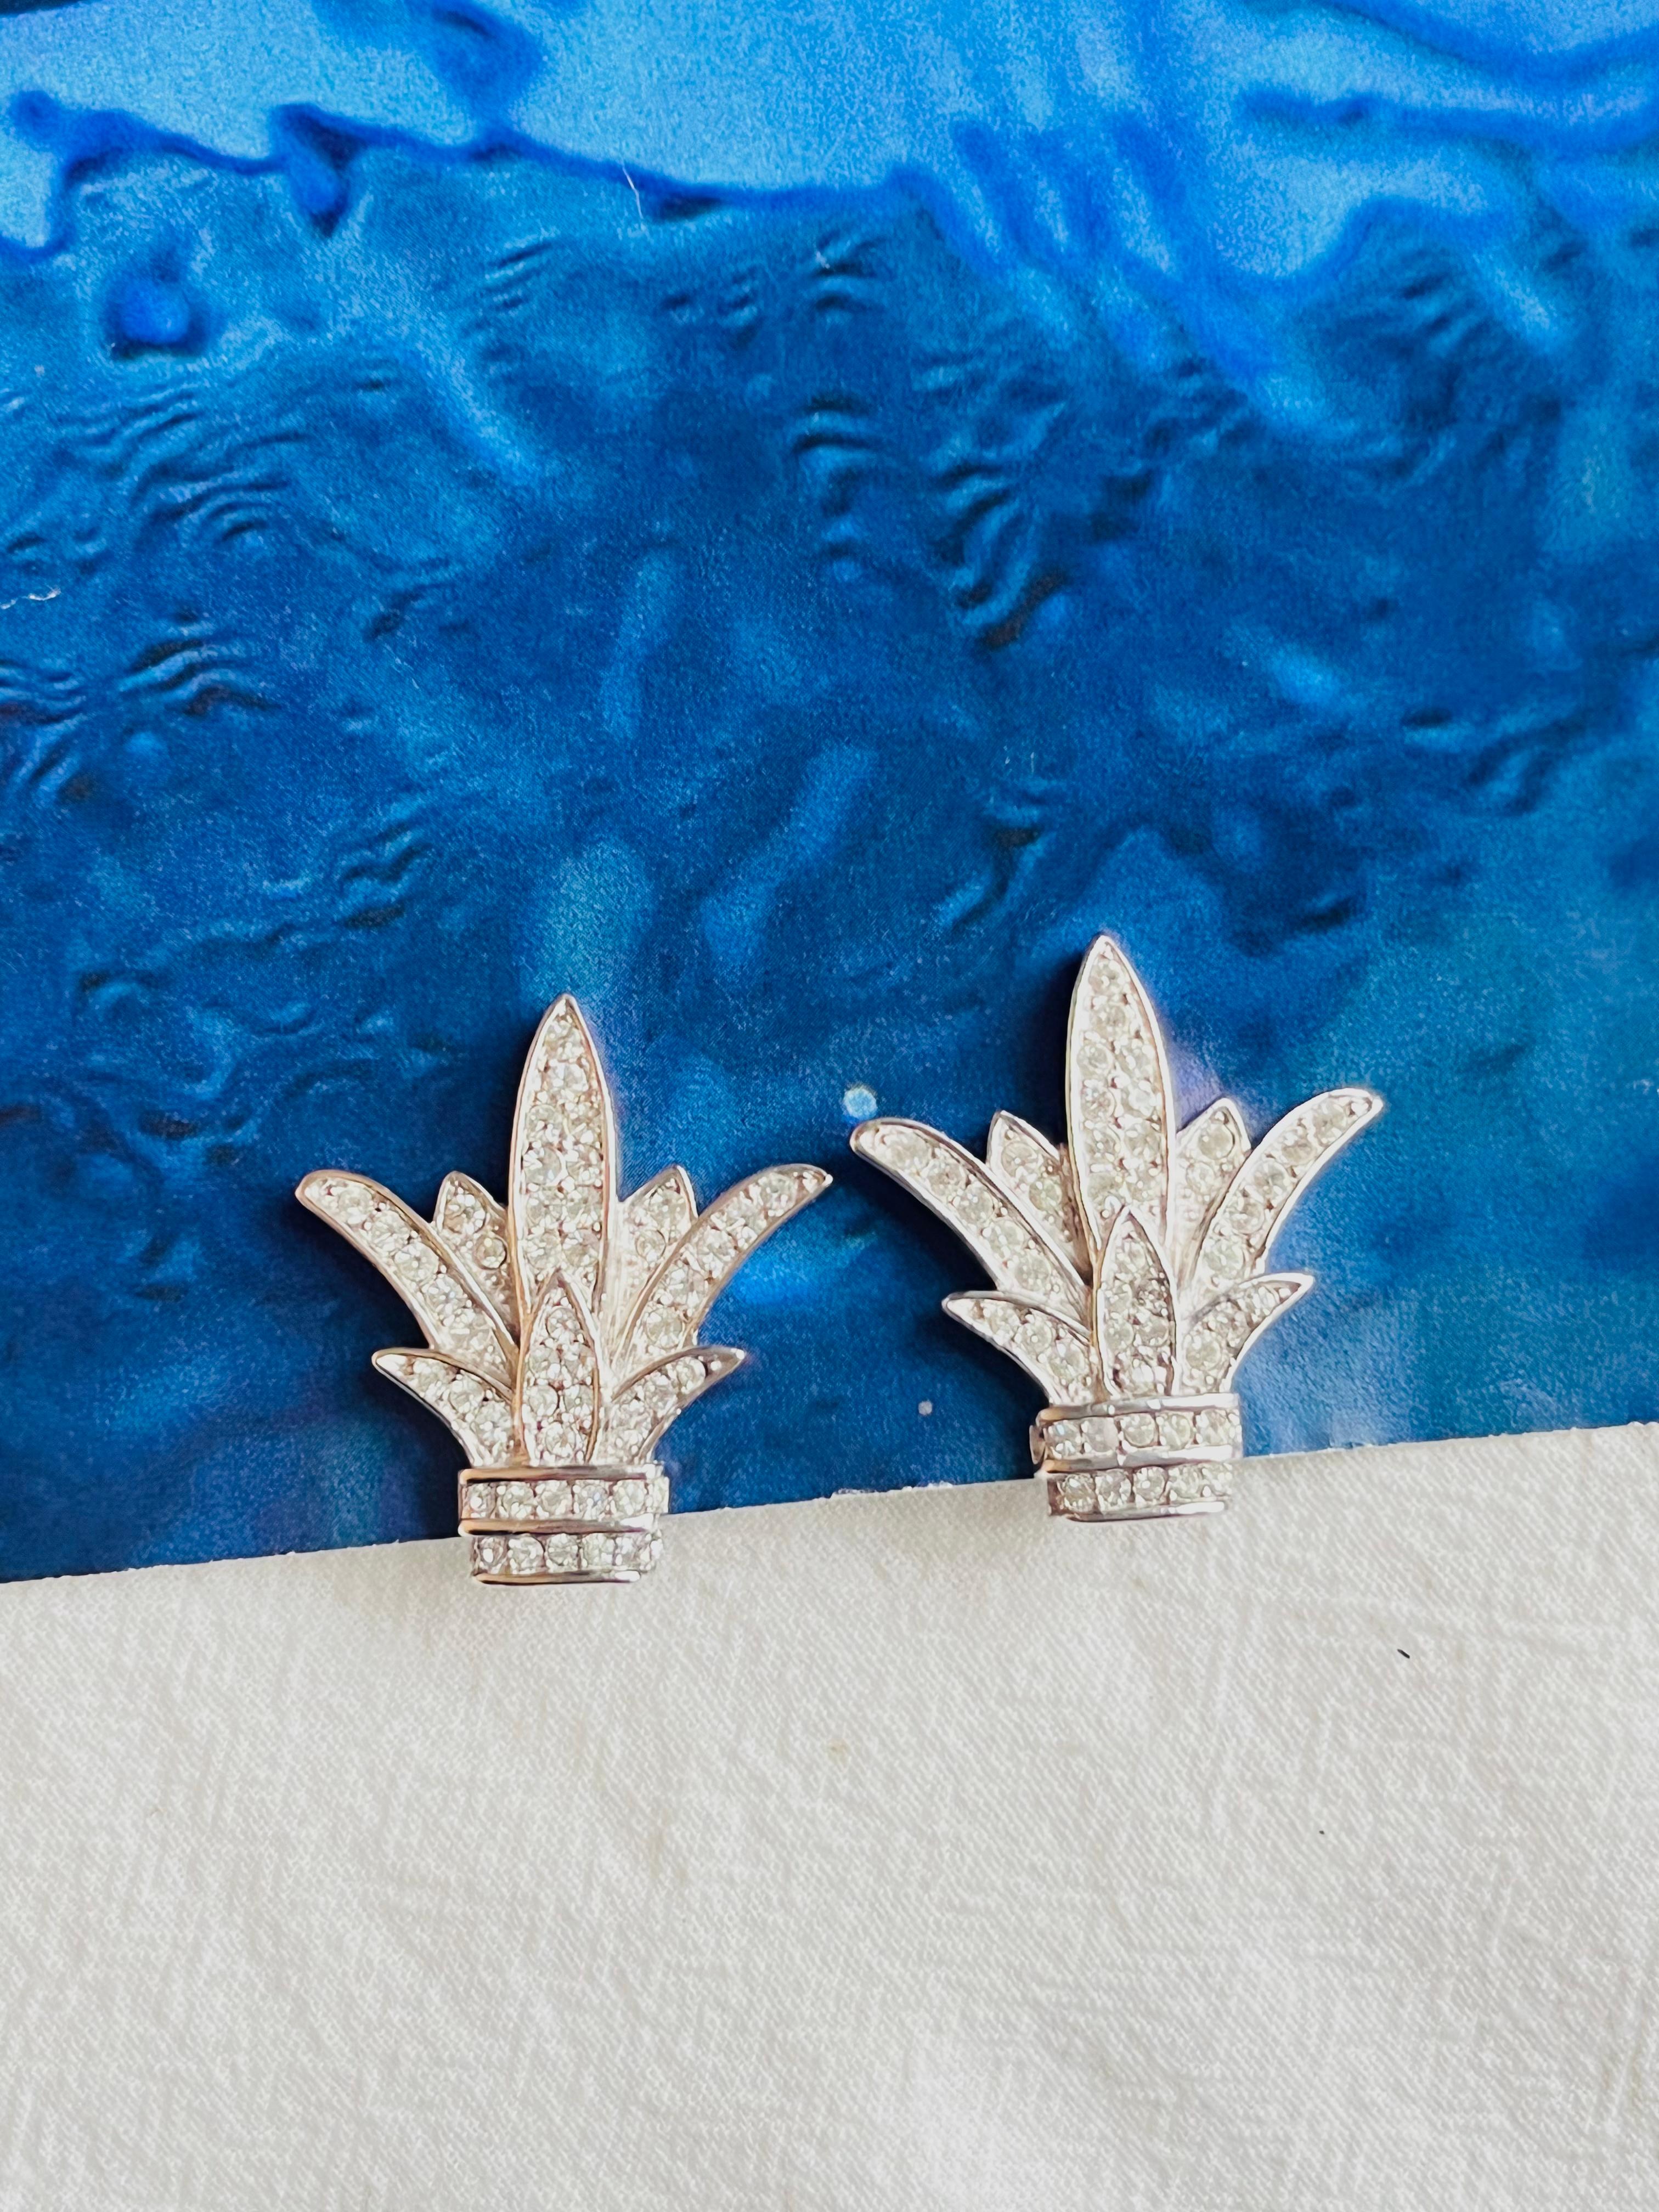 Christian Dior Vintage 1960s Fleur De Lis White Crystals Lily Flower Leaf Clip Earrings, Silver Tone

Very excellent condition. 100% genuine. Rare to find.

A very beautiful pair of clip on earrings by Chr. DIOR, signed at the back.

Size: 3.1*2.8